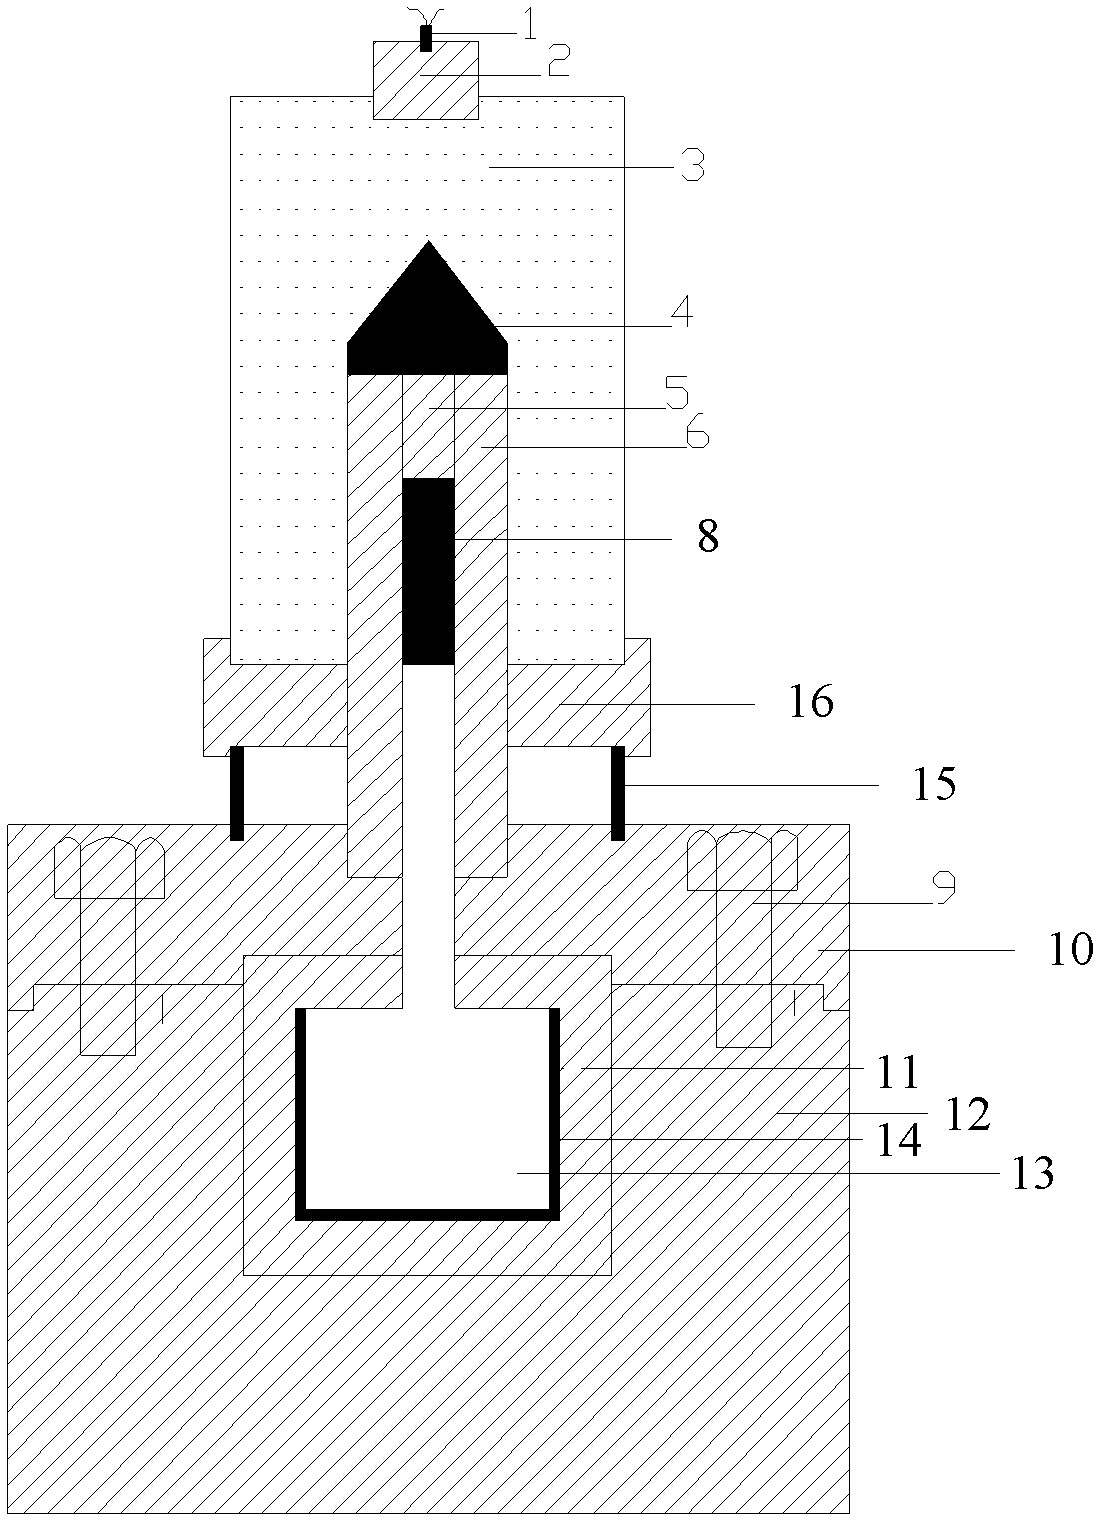 High-quenching-rate material impact synthesis and recovery device